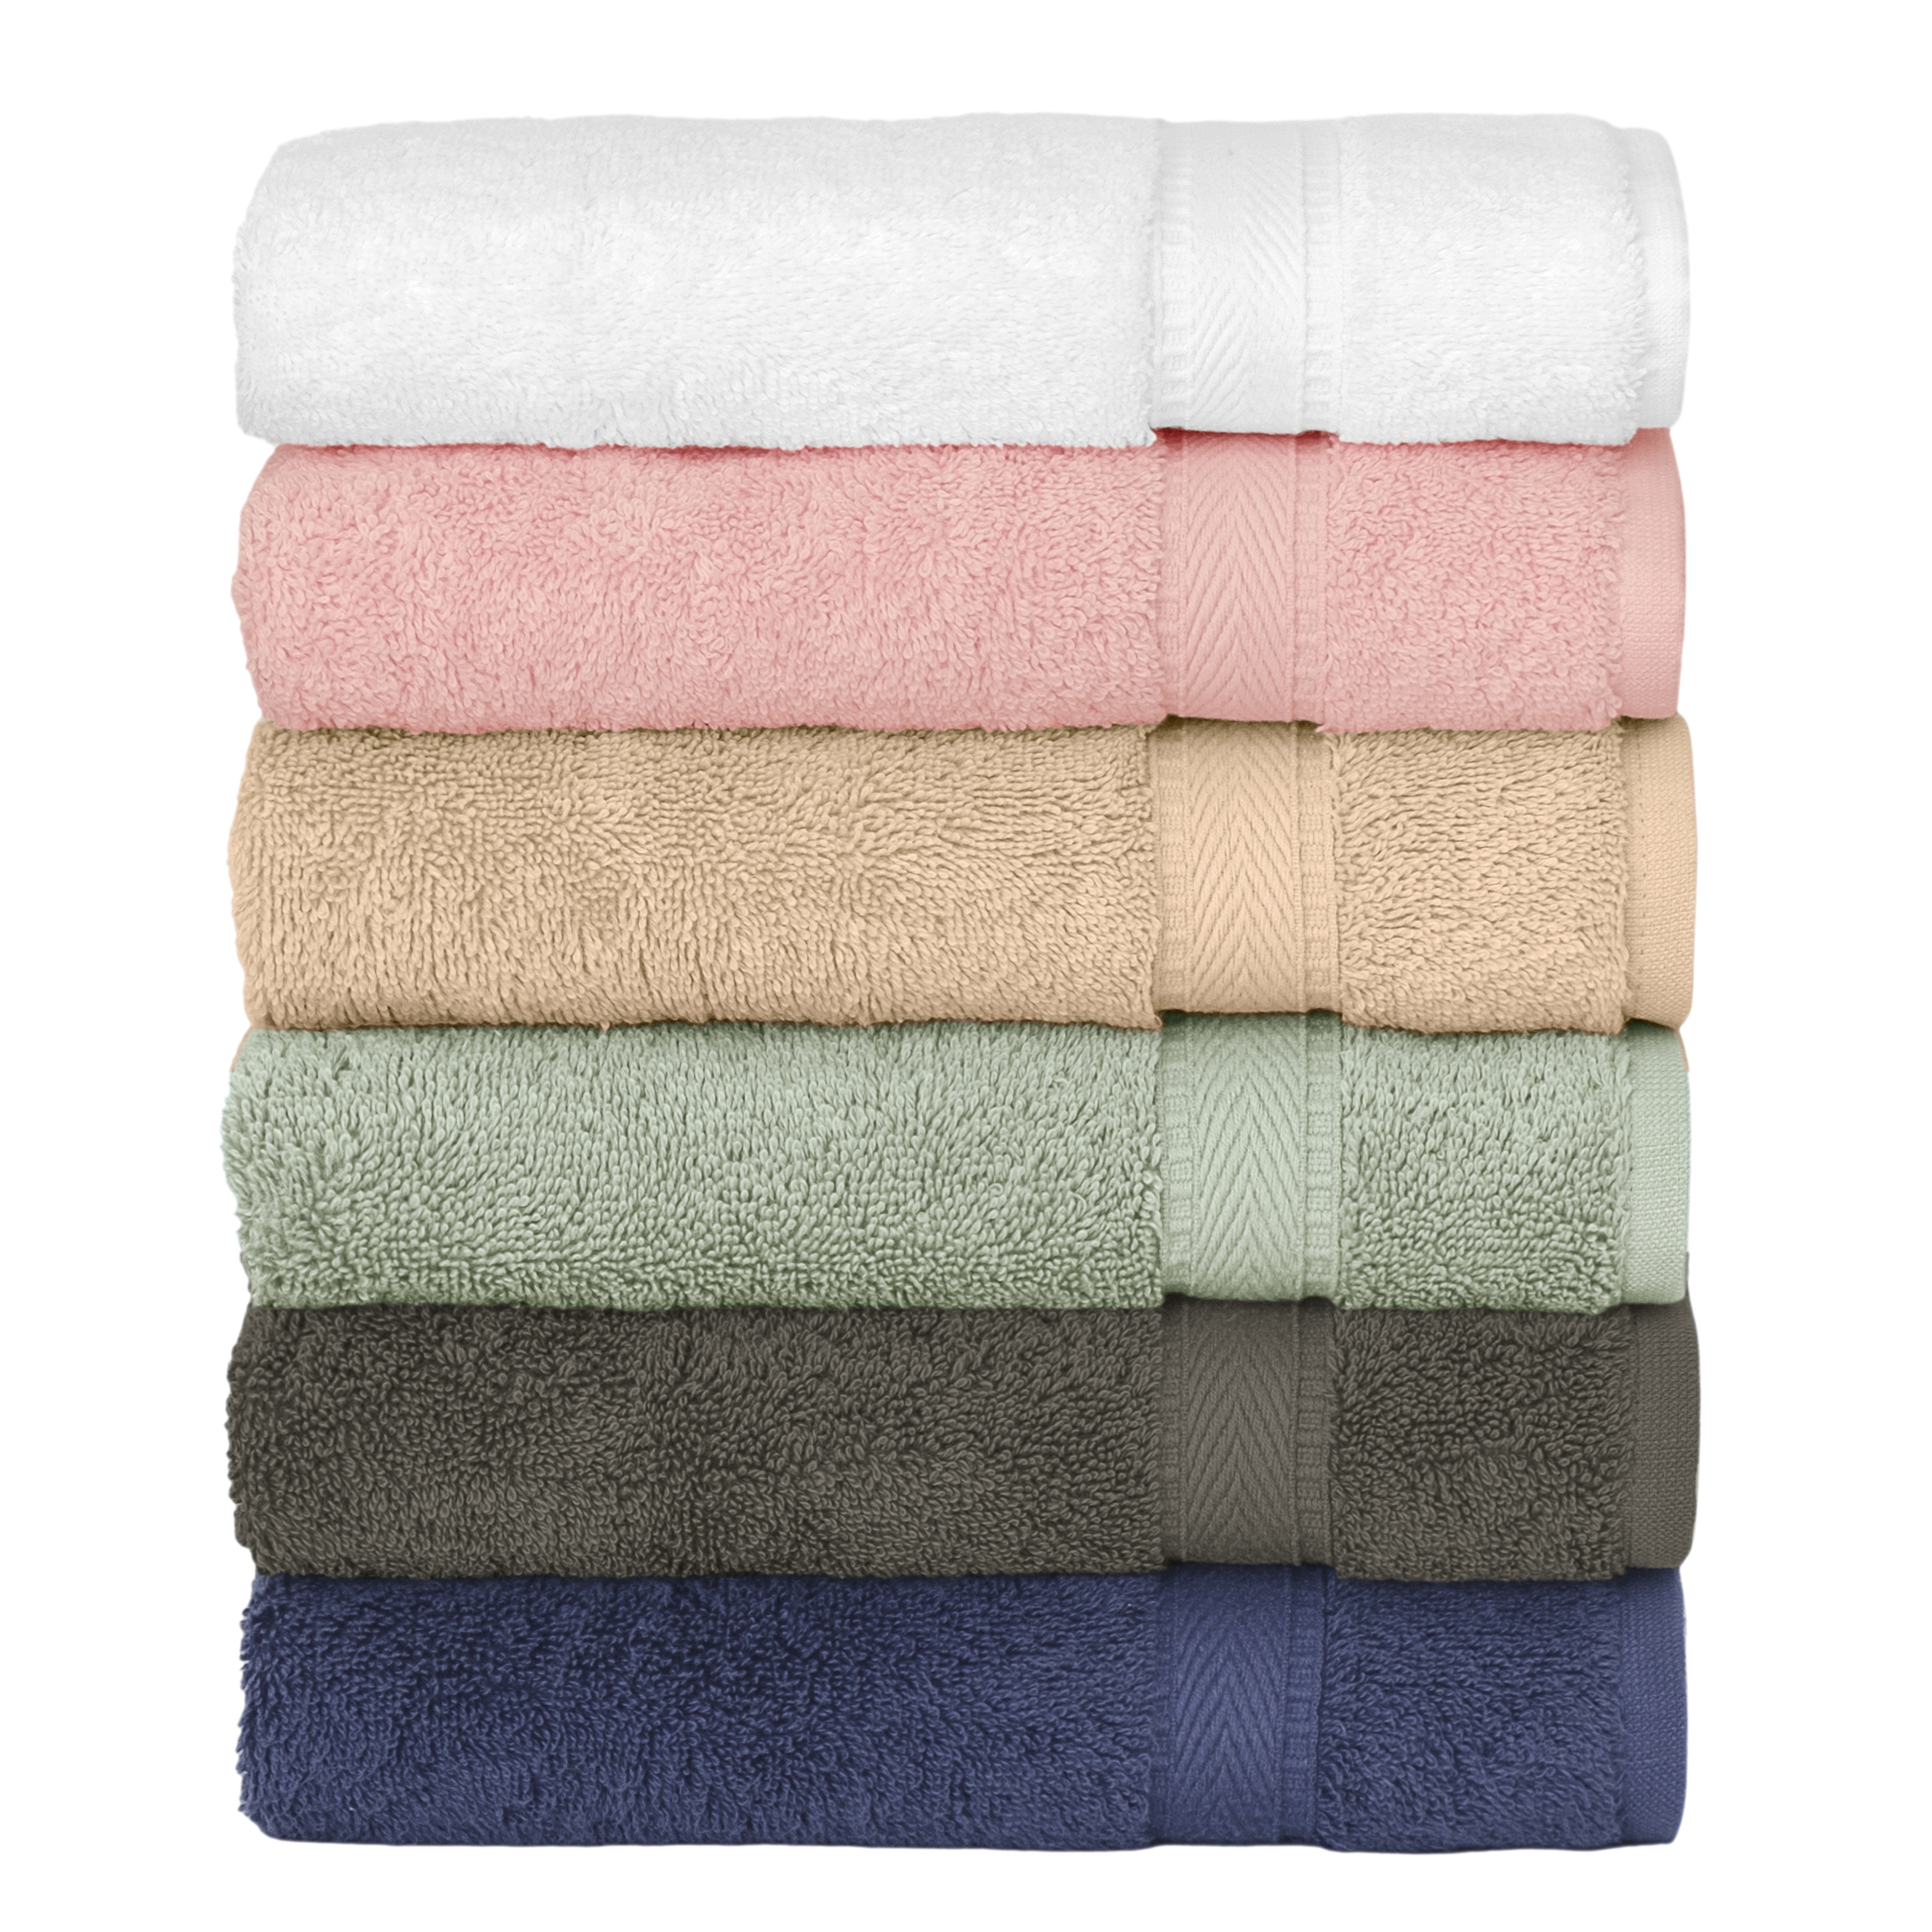 https://ak1.ostkcdn.com/images/products/is/images/direct/687f8c5598eeeb8f5725eb66e7fd8c87e731754b/Authentic-Hotel-Spa-Turkish-Cotton-Hand-Towels-%28Set-of-4%29.jpg